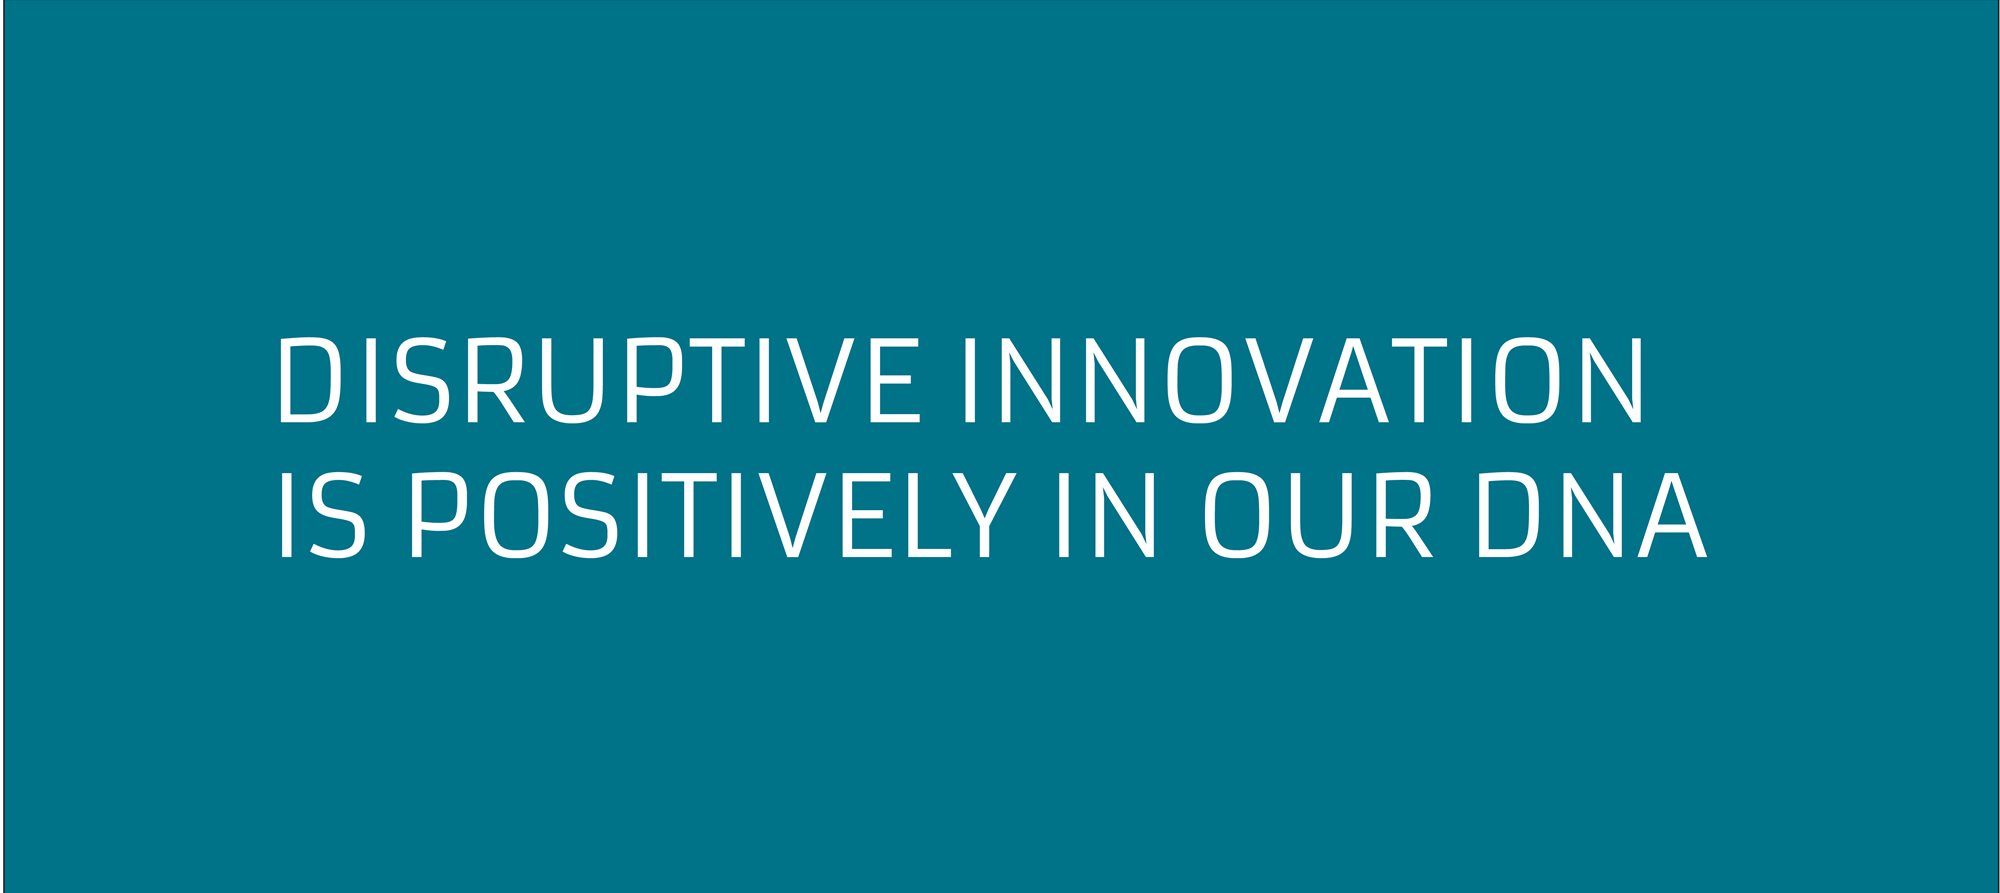 Disruptive Innovation is Positively in our DNA